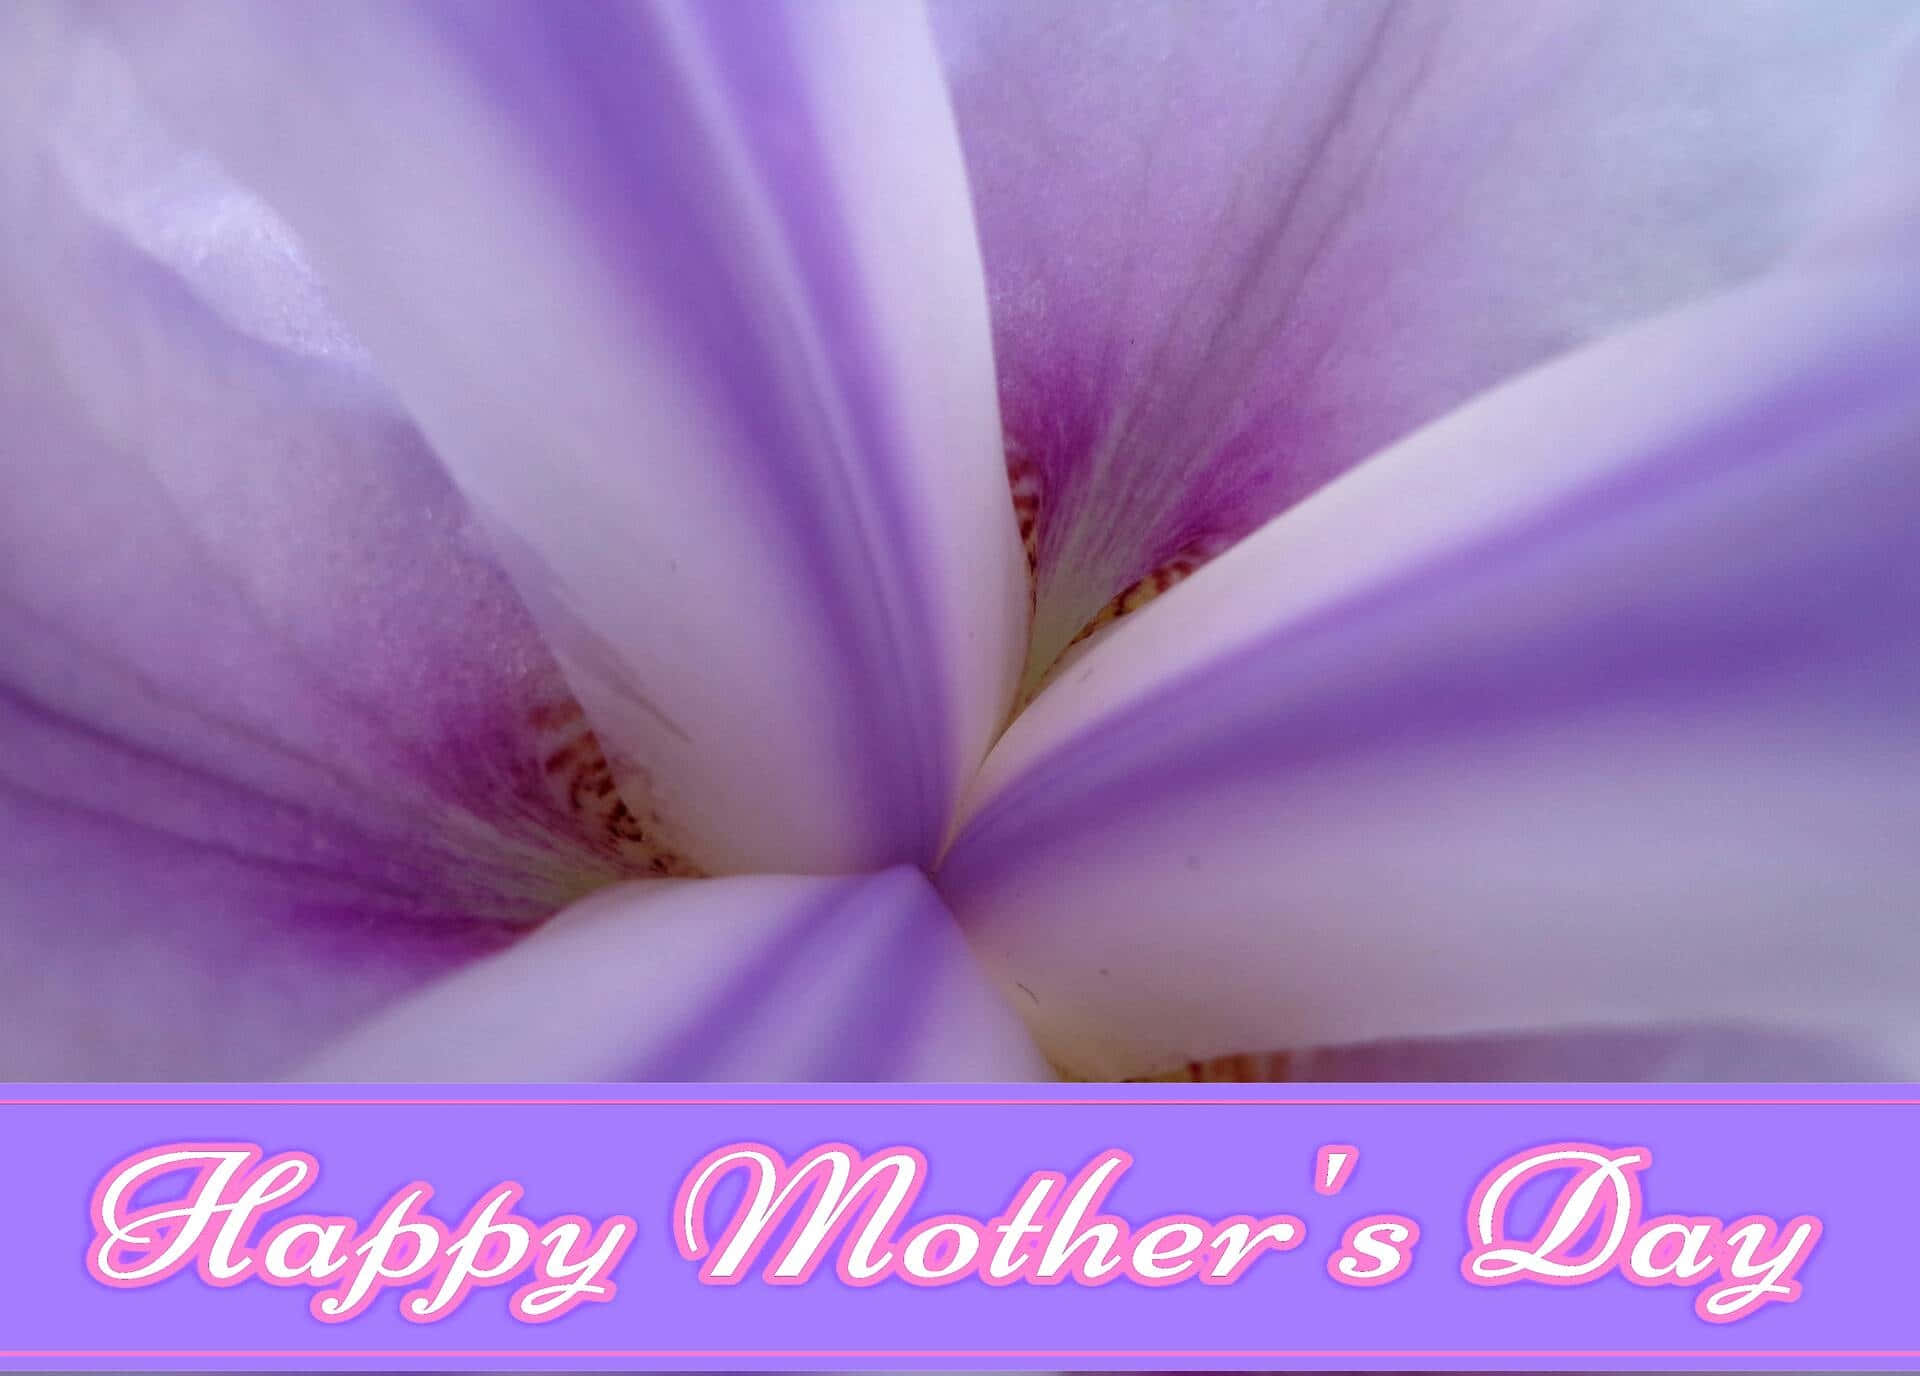 Celebrate Mothers Day with a token of appreciation that your mom deserves